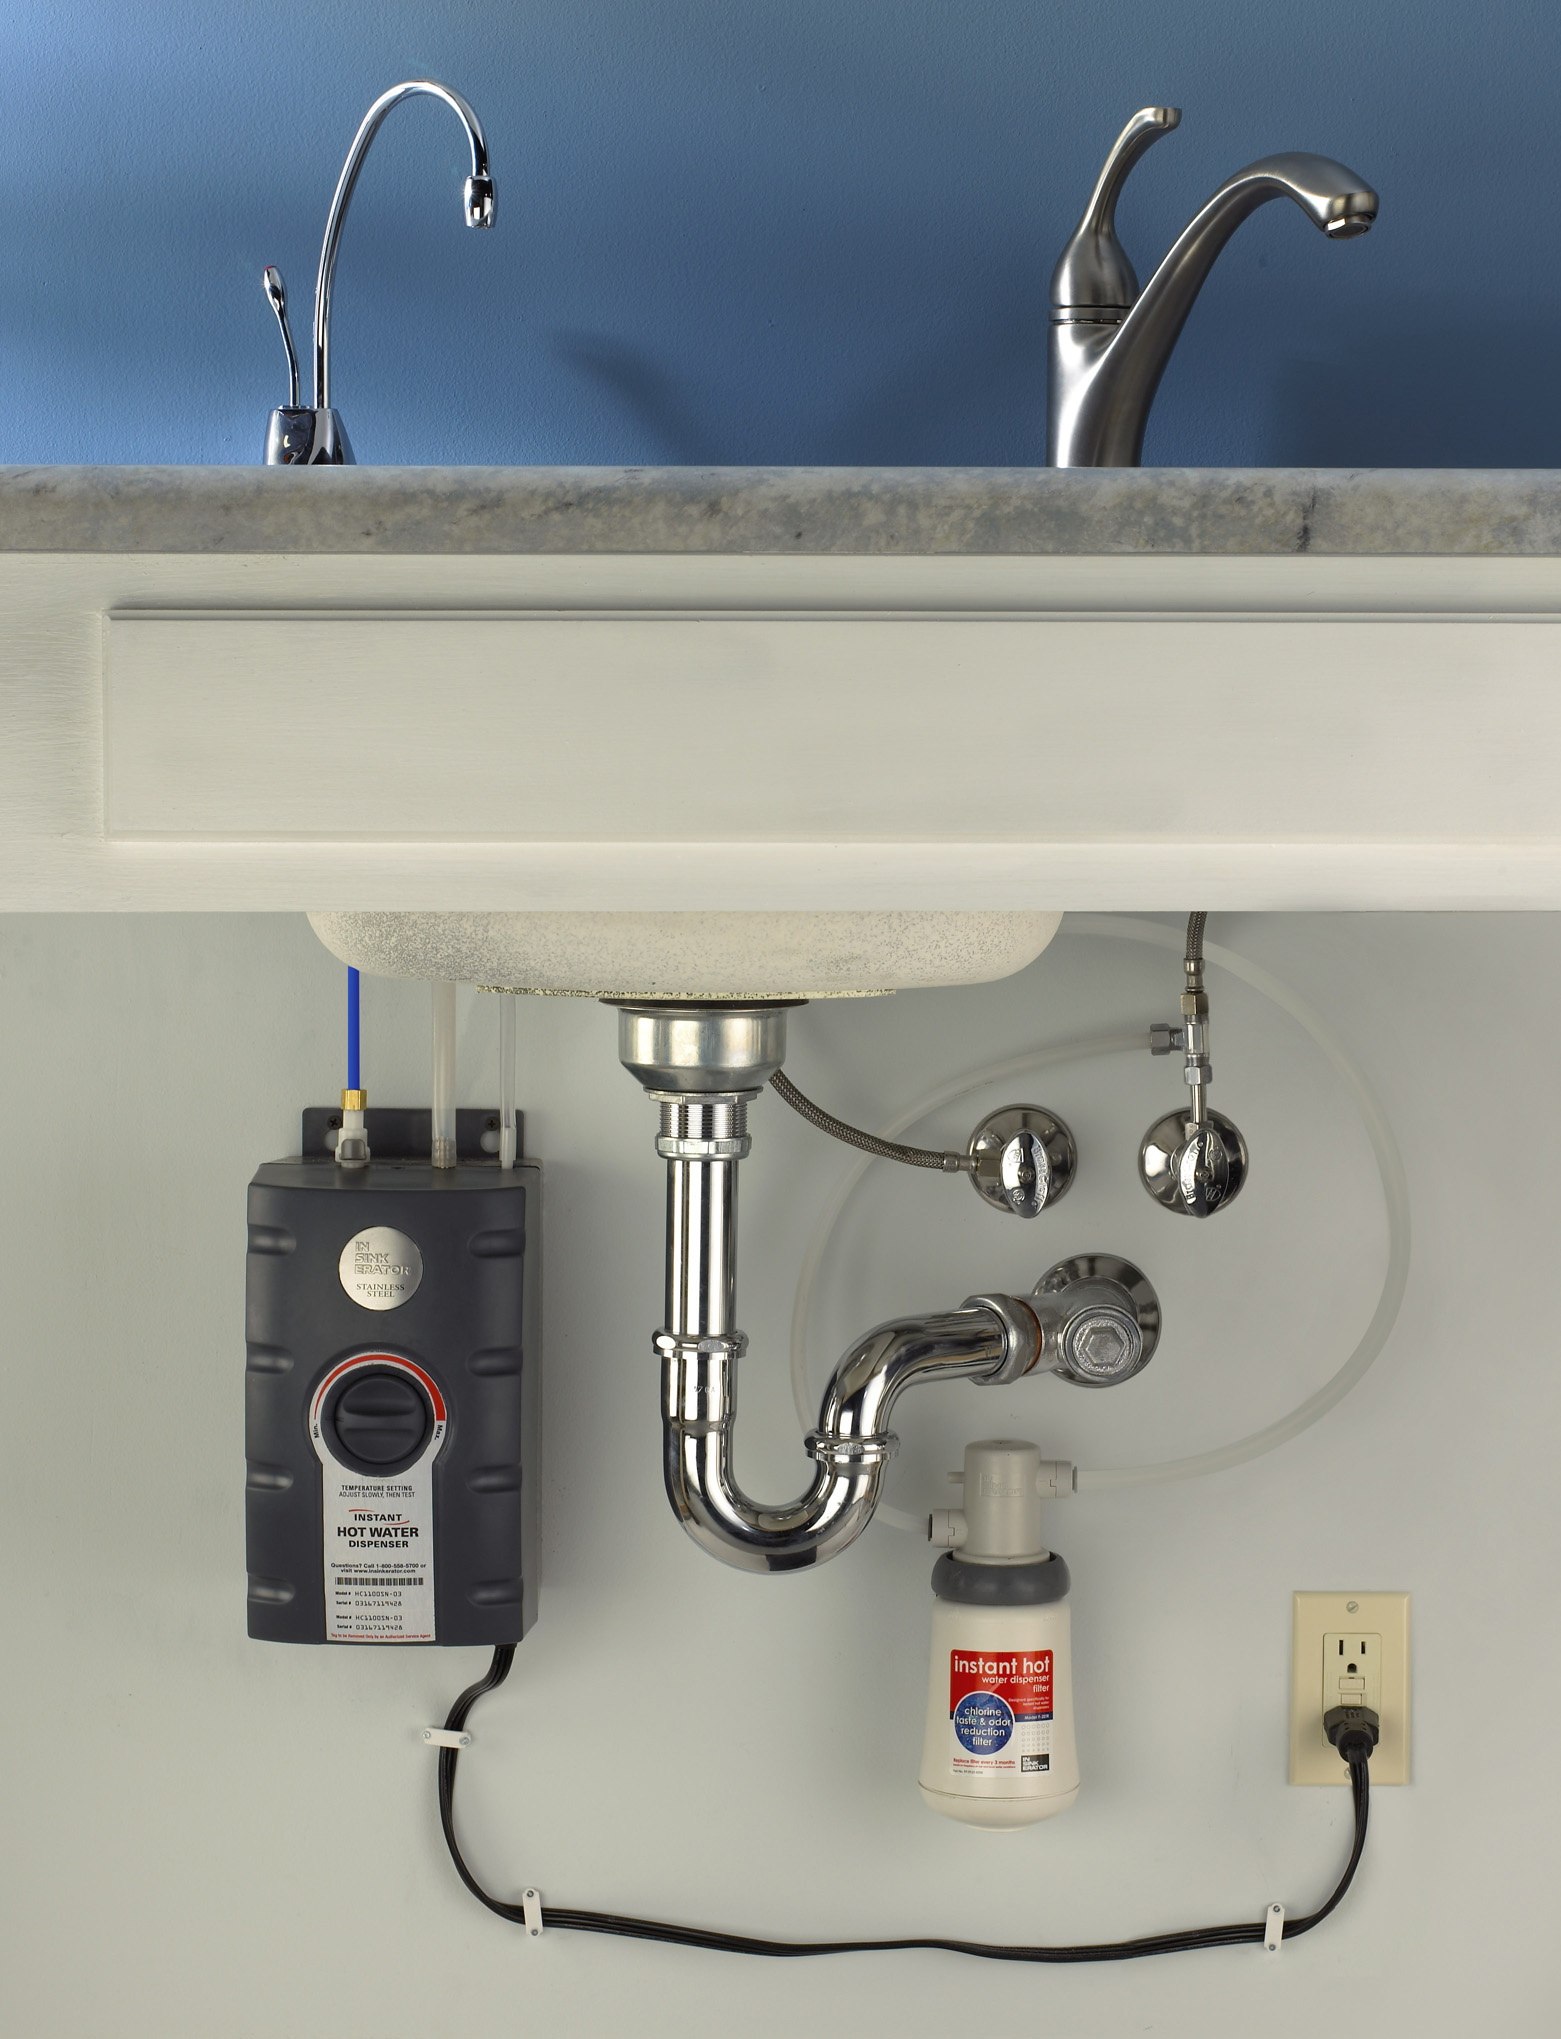 James Dulley: Sink-mounted hot water dispensers provide hot water instantly